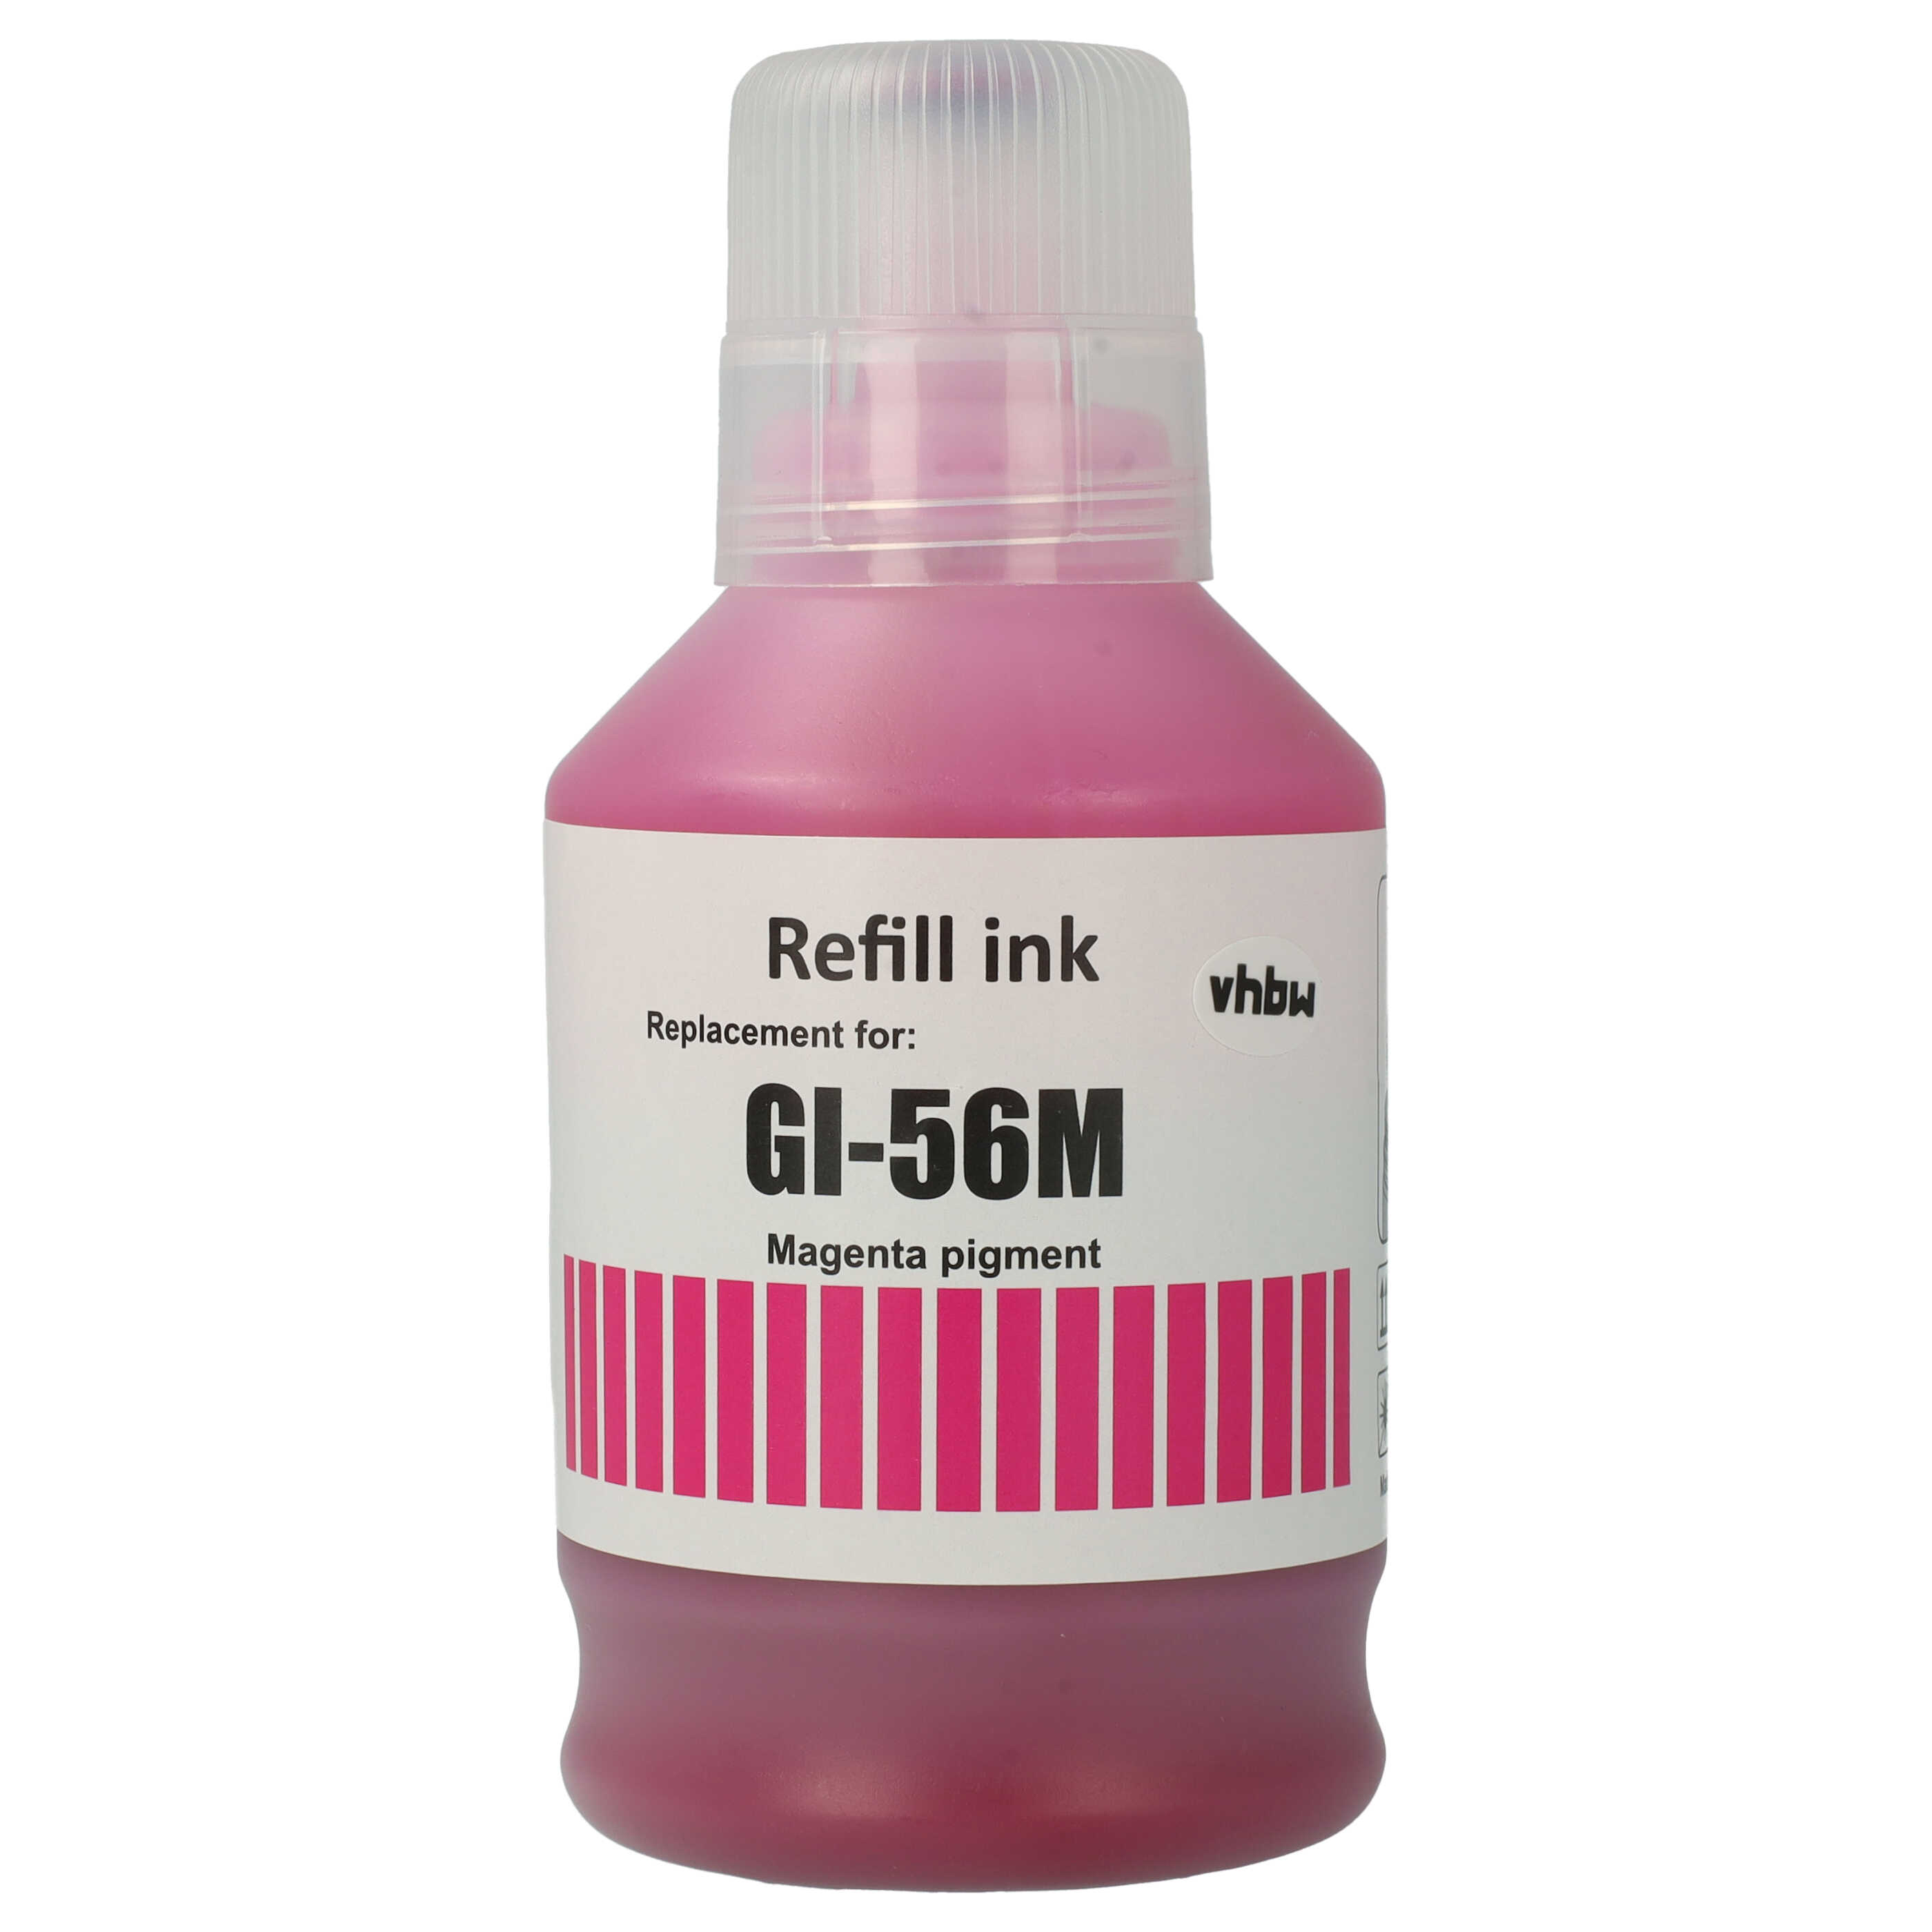 Refill Ink Magenta replaces Canon 4431C001, GI-56M for Canon Printer - Pigmented, 135 ml